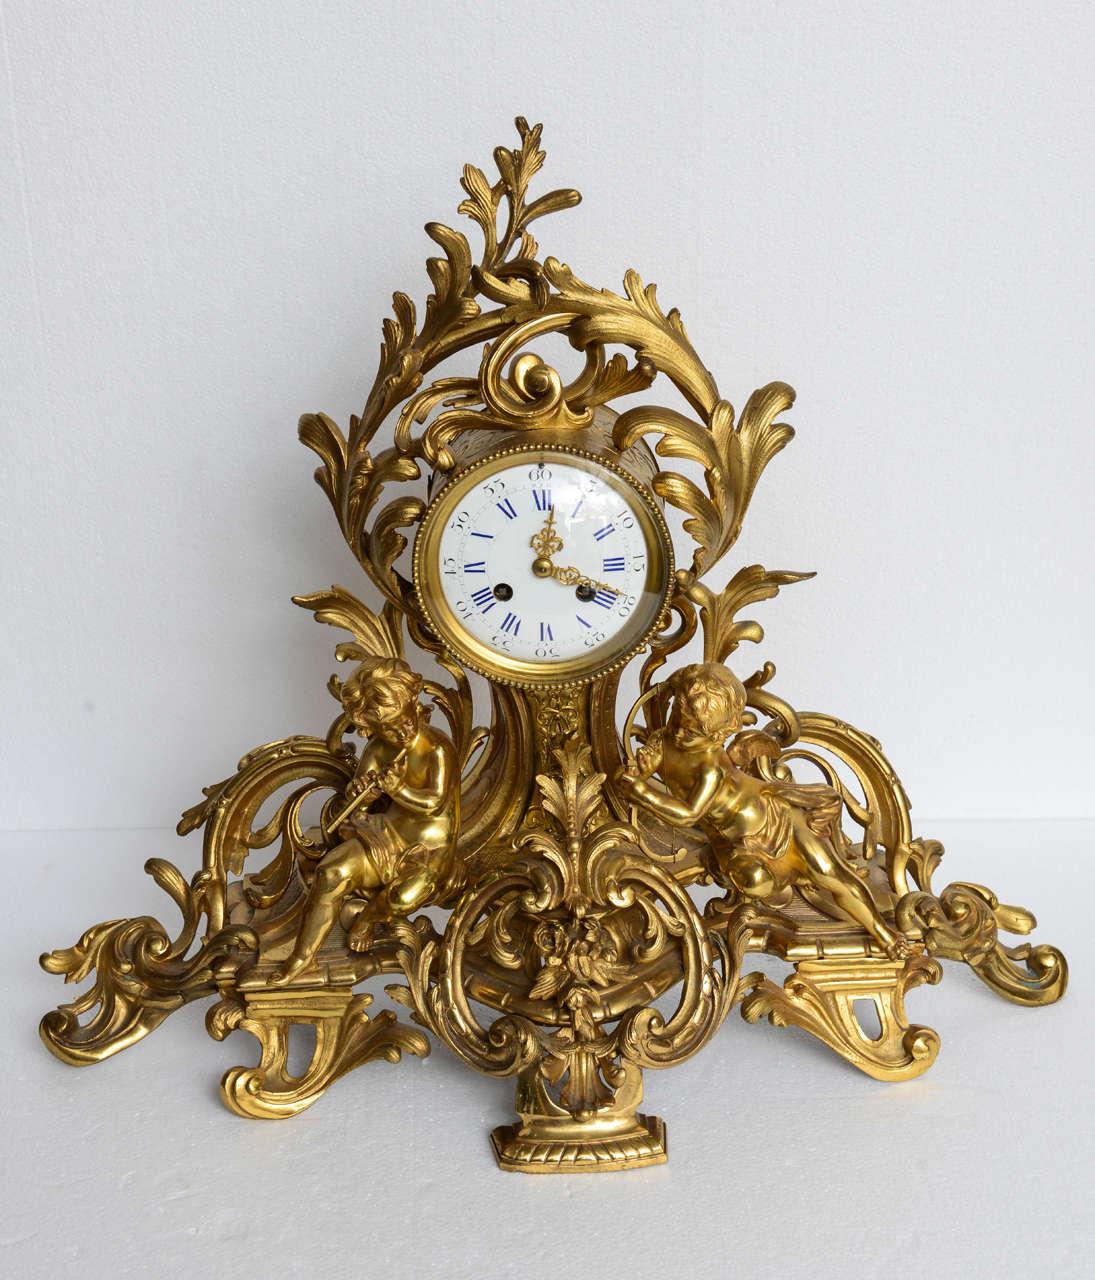 A near PAIR of French Louis XV mantel clocks with putti; finely cast with musical putti sitting on a rocaille form base, original restored finish, clock is working and keeps good time. They are identical with exception of the bezel which are very